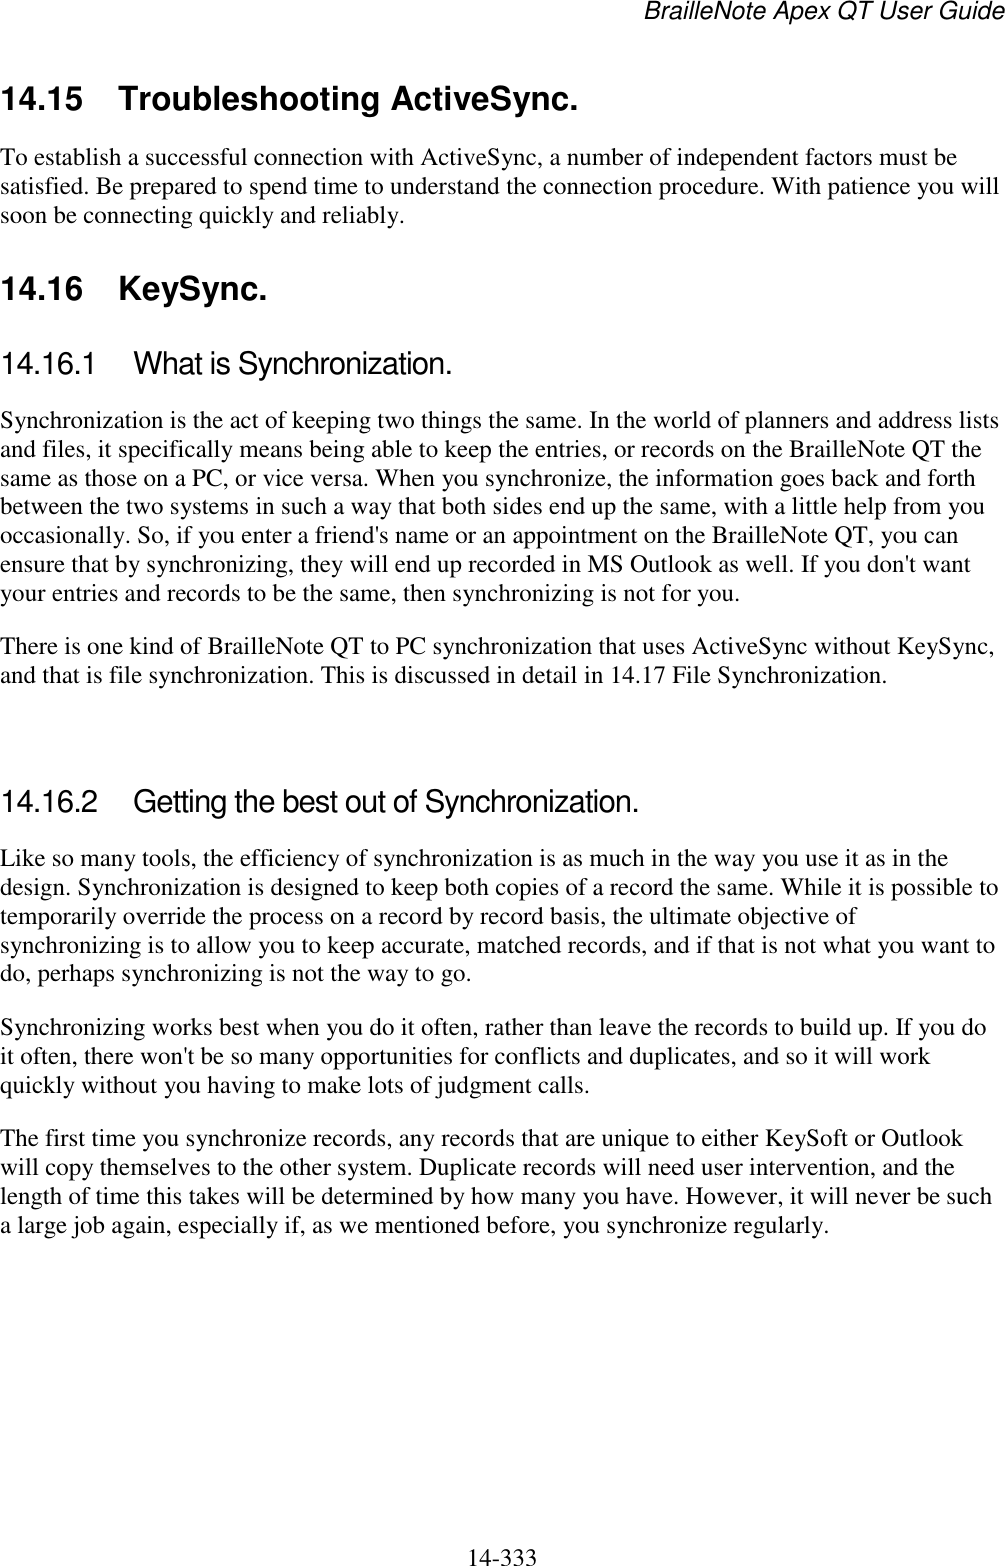 BrailleNote Apex QT User Guide  14-333   14.15  Troubleshooting ActiveSync. To establish a successful connection with ActiveSync, a number of independent factors must be satisfied. Be prepared to spend time to understand the connection procedure. With patience you will soon be connecting quickly and reliably.   14.16  KeySync. 14.16.1  What is Synchronization. Synchronization is the act of keeping two things the same. In the world of planners and address lists and files, it specifically means being able to keep the entries, or records on the BrailleNote QT the same as those on a PC, or vice versa. When you synchronize, the information goes back and forth between the two systems in such a way that both sides end up the same, with a little help from you occasionally. So, if you enter a friend&apos;s name or an appointment on the BrailleNote QT, you can ensure that by synchronizing, they will end up recorded in MS Outlook as well. If you don&apos;t want your entries and records to be the same, then synchronizing is not for you. There is one kind of BrailleNote QT to PC synchronization that uses ActiveSync without KeySync, and that is file synchronization. This is discussed in detail in 14.17 File Synchronization.   14.16.2  Getting the best out of Synchronization. Like so many tools, the efficiency of synchronization is as much in the way you use it as in the design. Synchronization is designed to keep both copies of a record the same. While it is possible to temporarily override the process on a record by record basis, the ultimate objective of synchronizing is to allow you to keep accurate, matched records, and if that is not what you want to do, perhaps synchronizing is not the way to go. Synchronizing works best when you do it often, rather than leave the records to build up. If you do it often, there won&apos;t be so many opportunities for conflicts and duplicates, and so it will work quickly without you having to make lots of judgment calls. The first time you synchronize records, any records that are unique to either KeySoft or Outlook will copy themselves to the other system. Duplicate records will need user intervention, and the length of time this takes will be determined by how many you have. However, it will never be such a large job again, especially if, as we mentioned before, you synchronize regularly.   